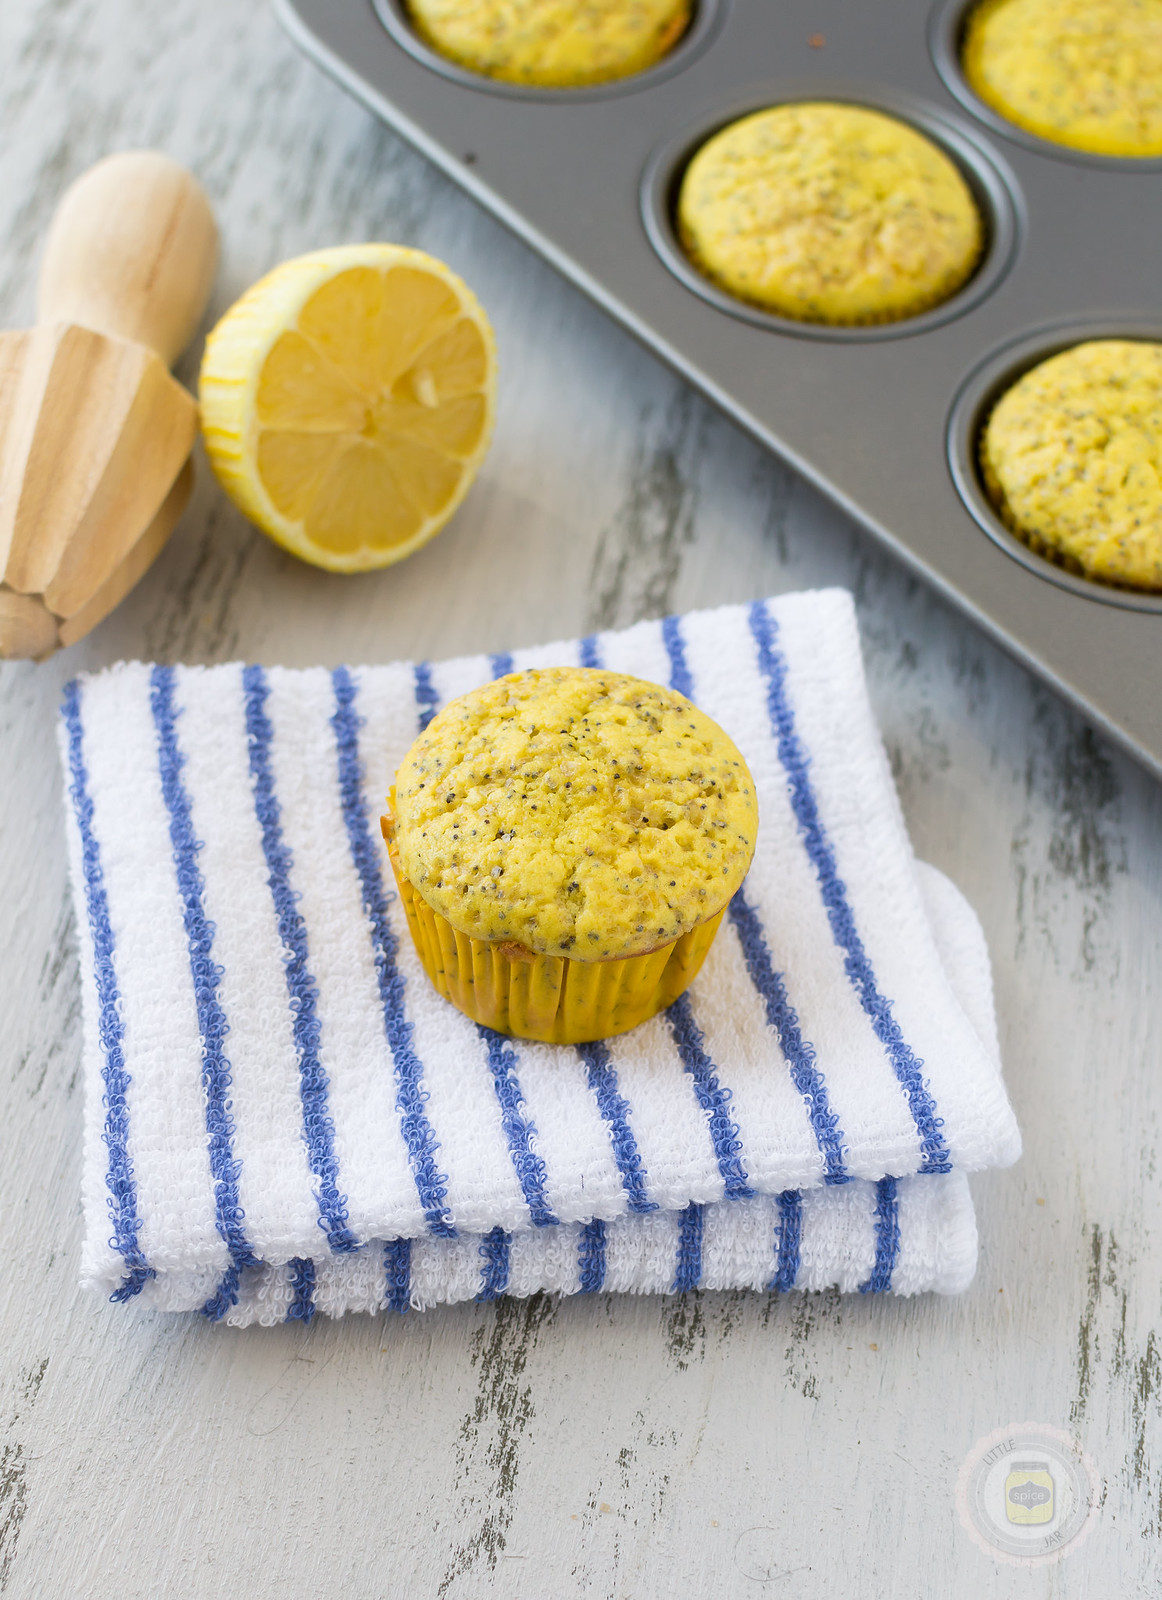 baked muffin on striped hand towel on white surface